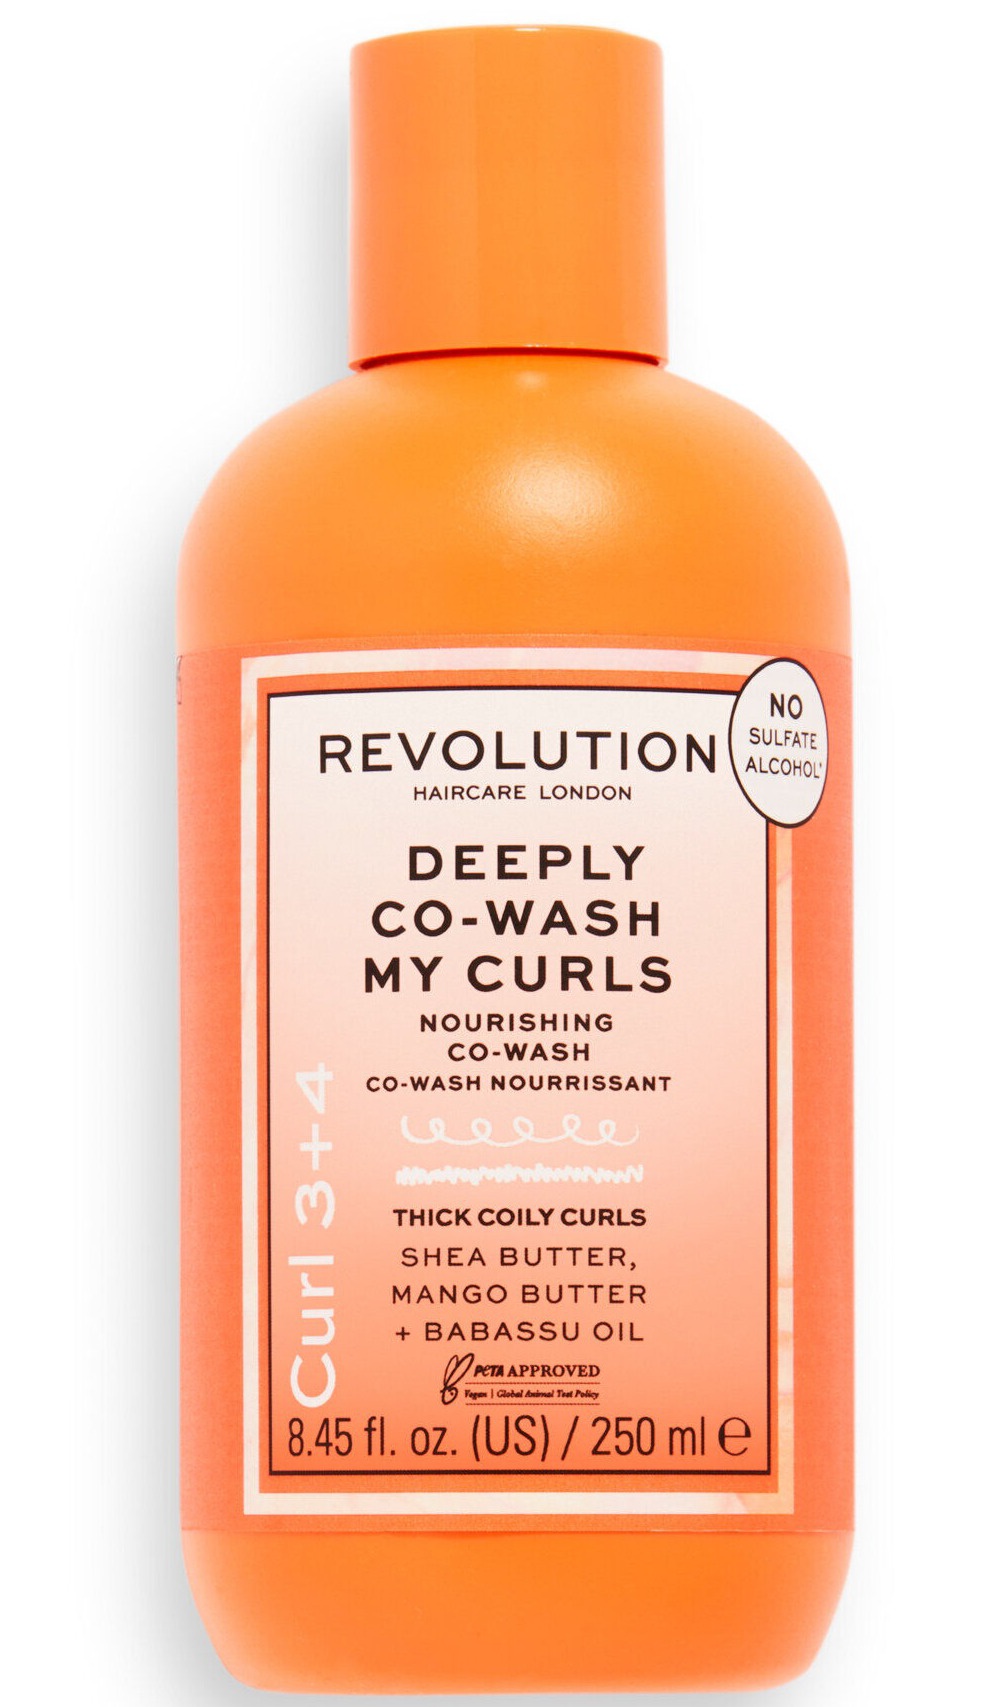 Revolution Haircare Deeply Co-Wash My Curls Nourishing Co-Wash